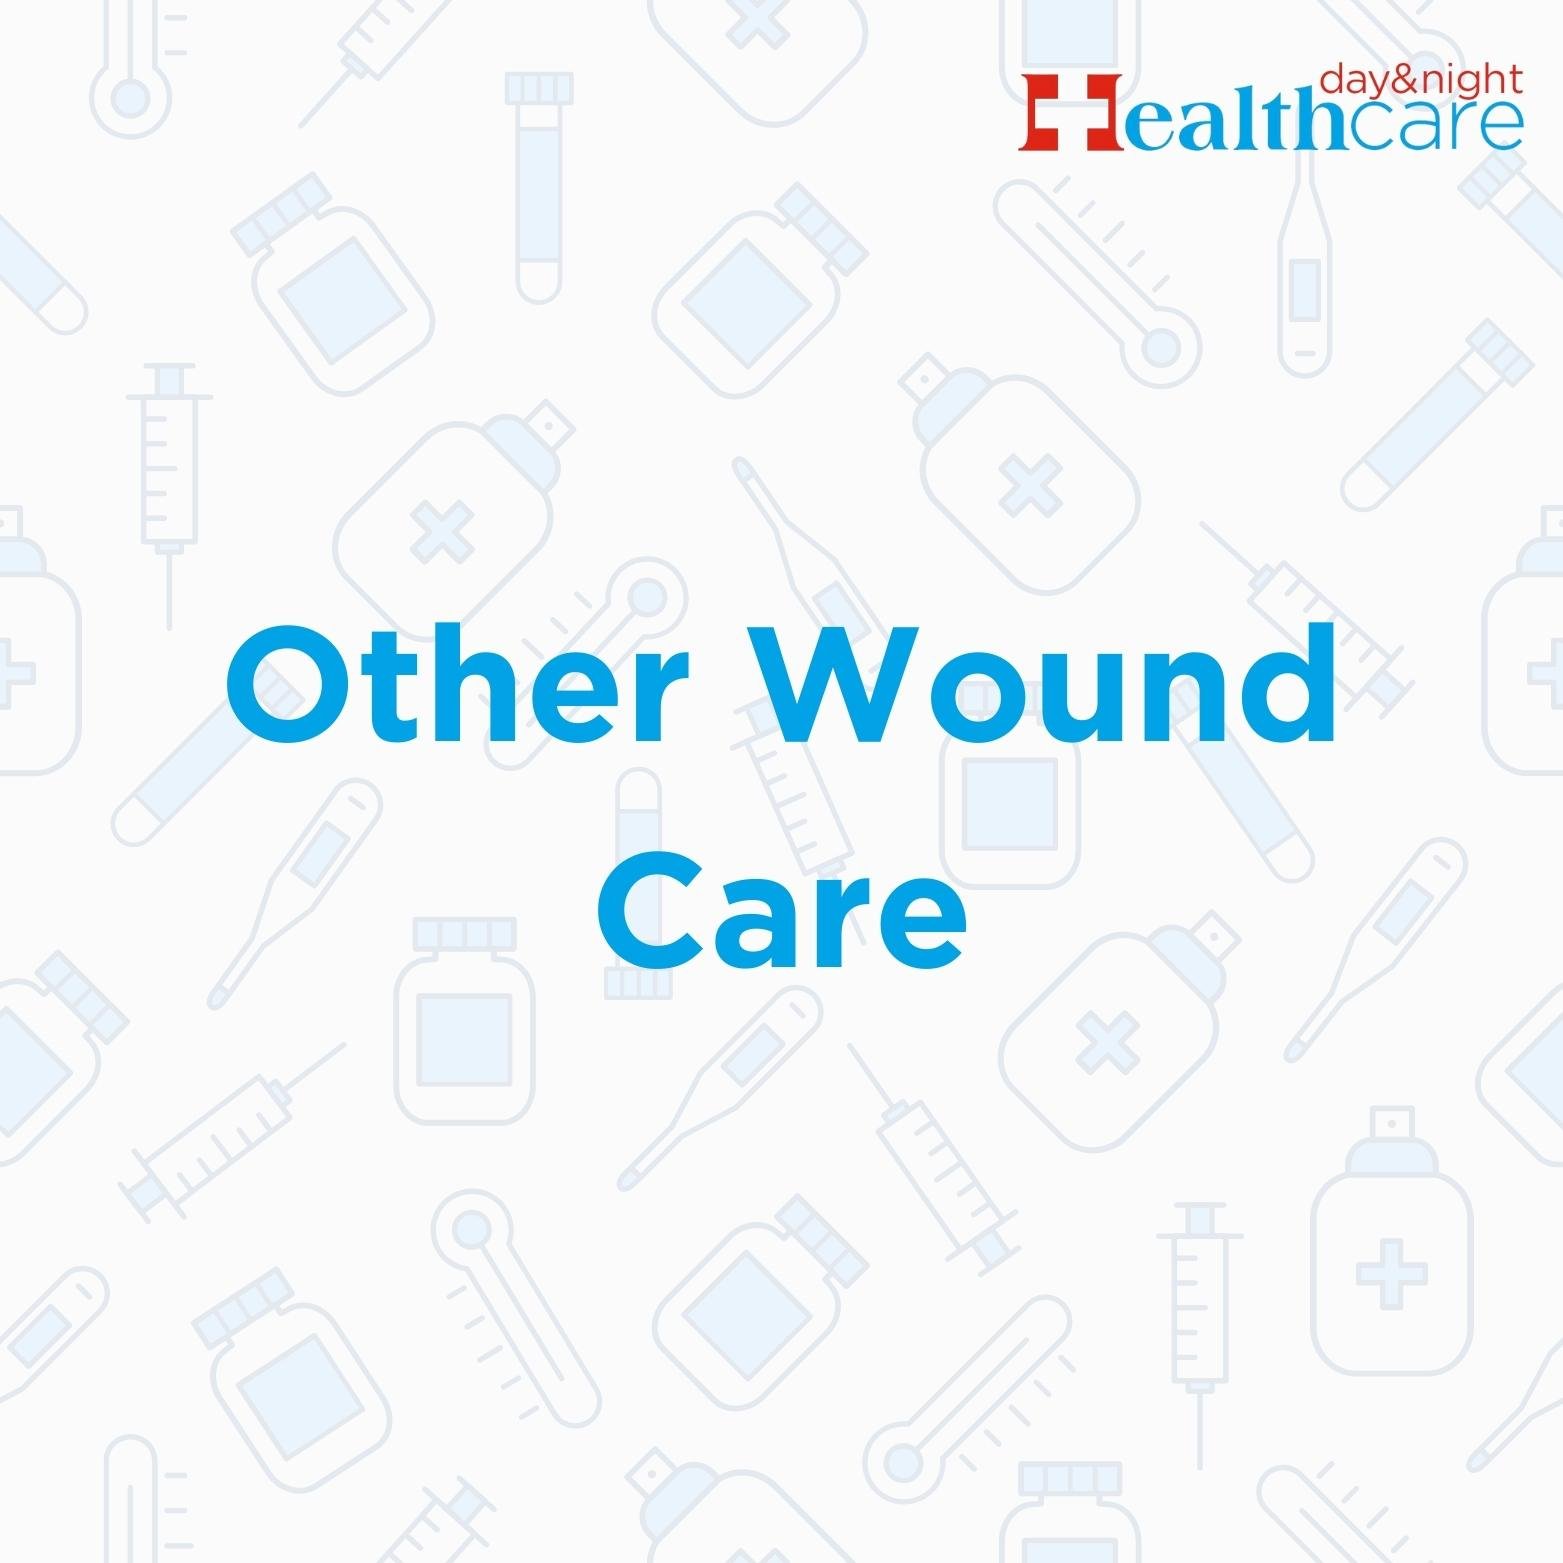 Miscellaneous Wound Care